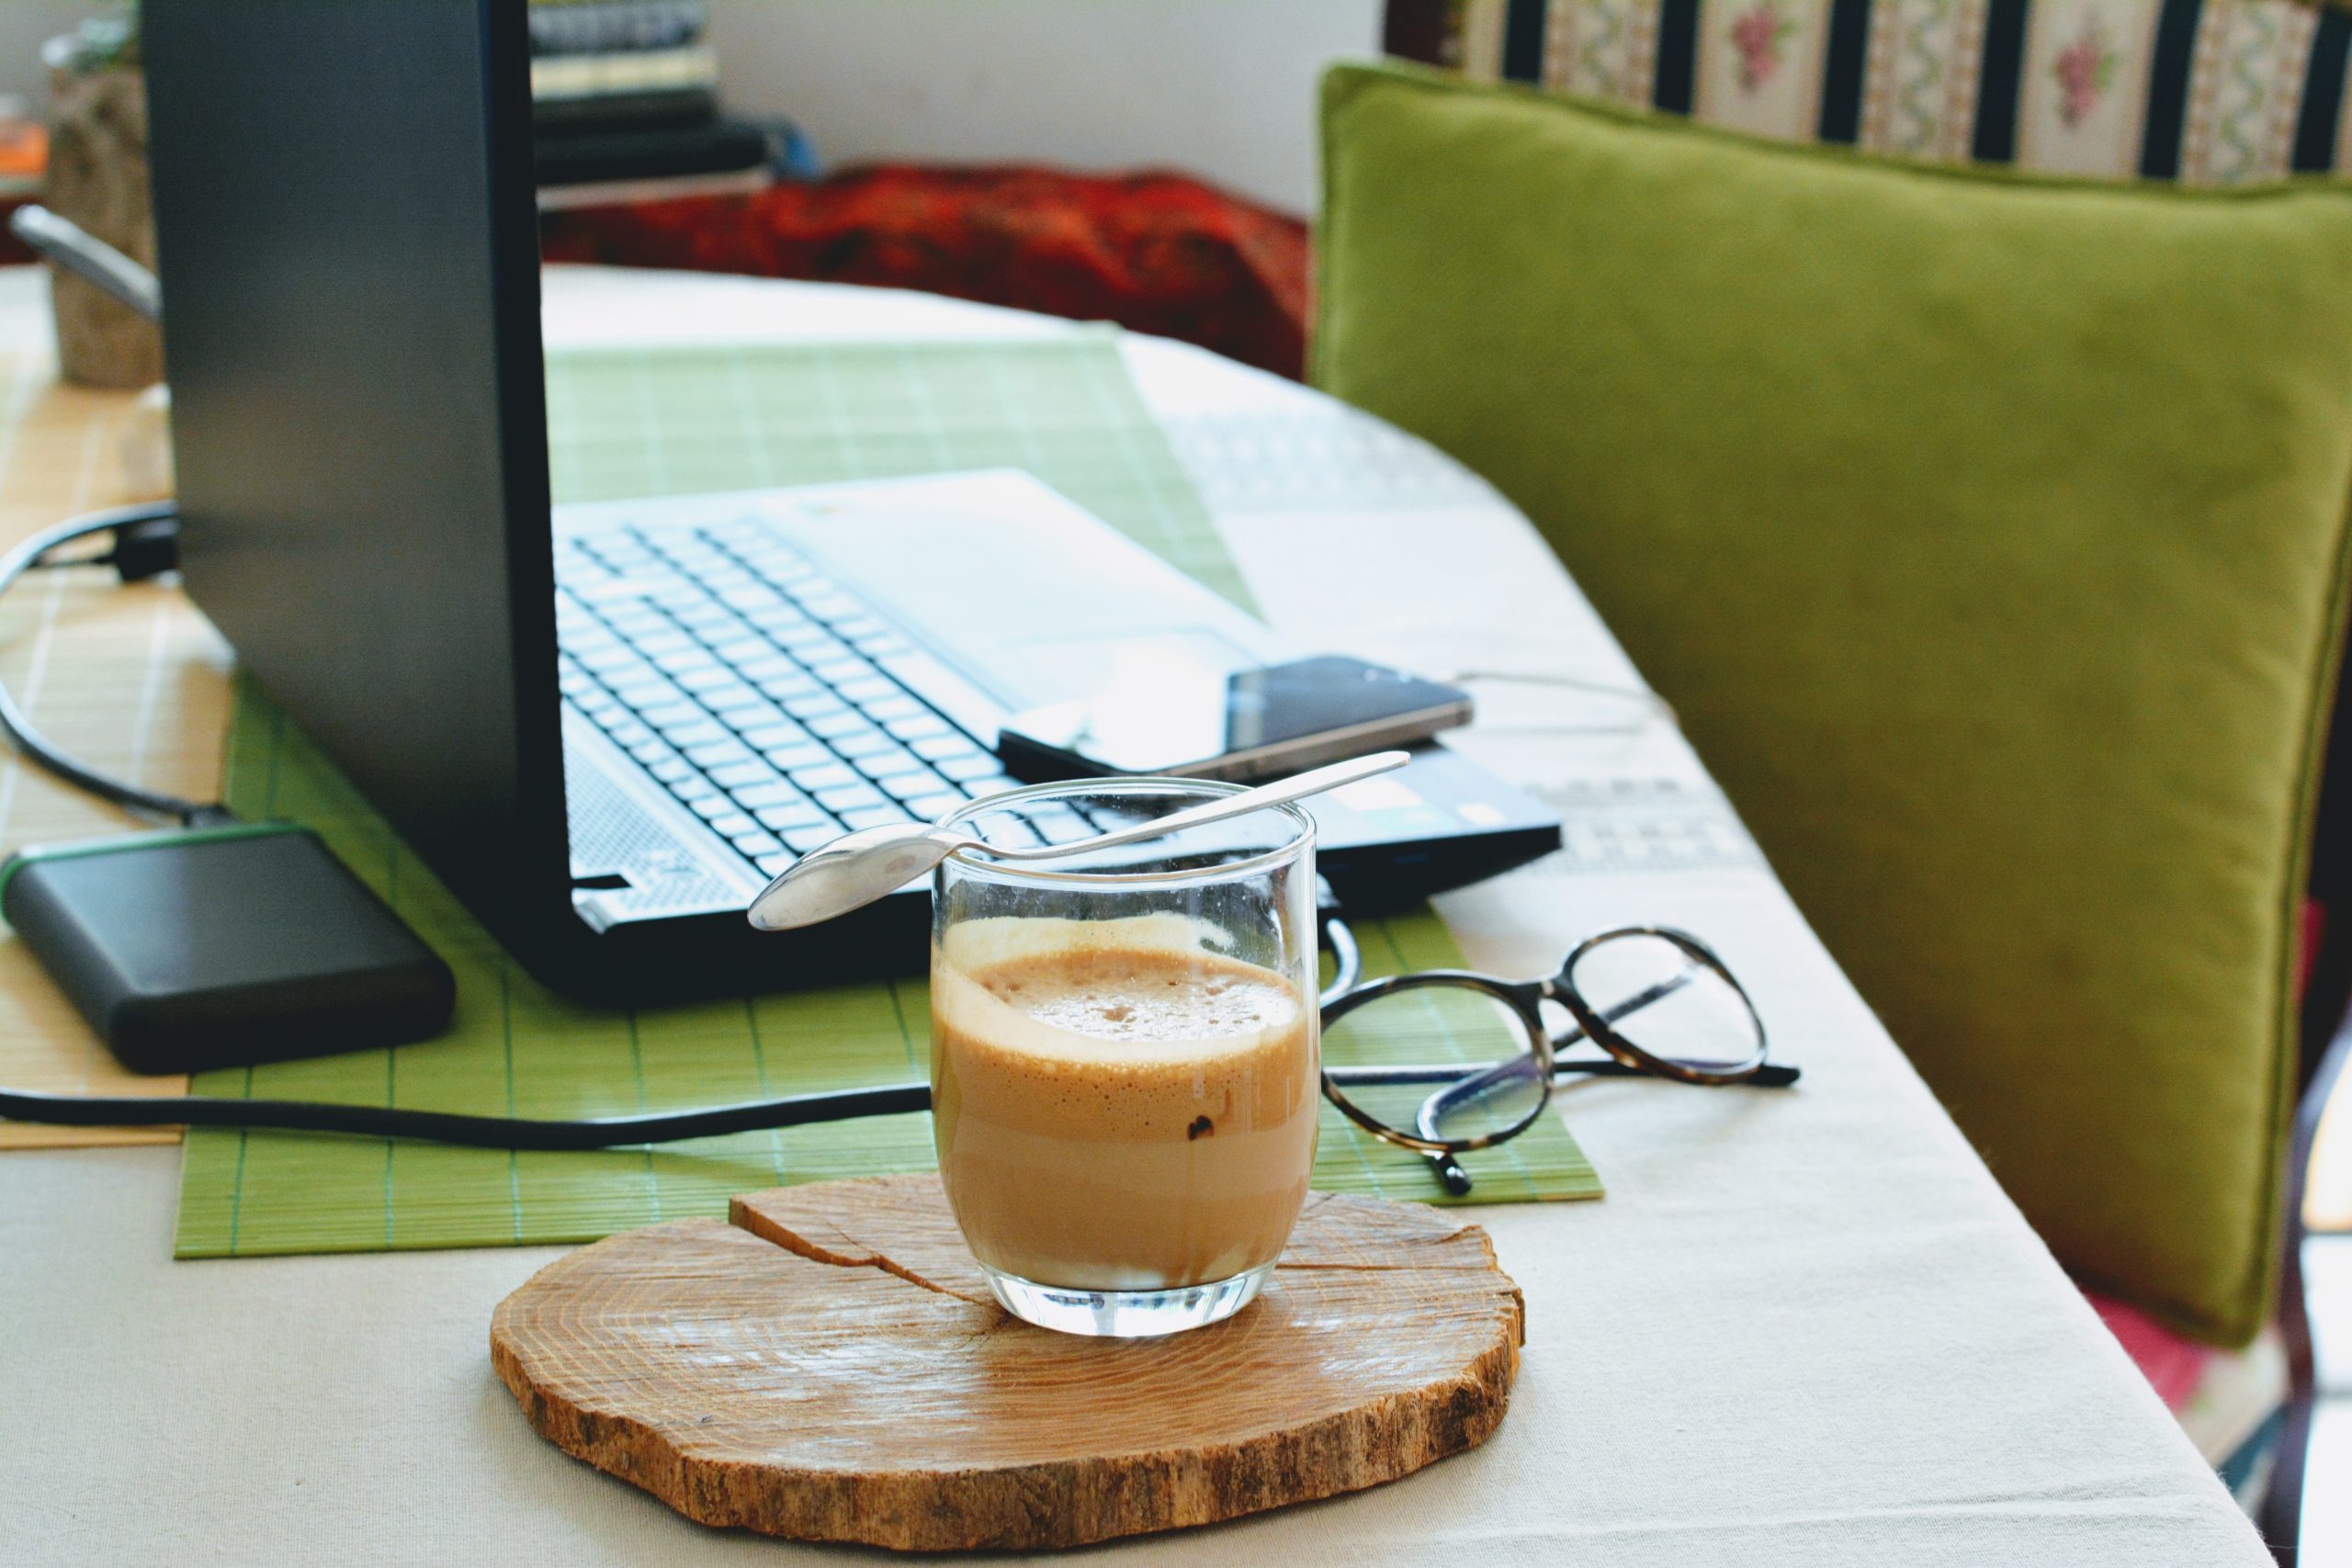 How to Balance Work-Life While Working From Home